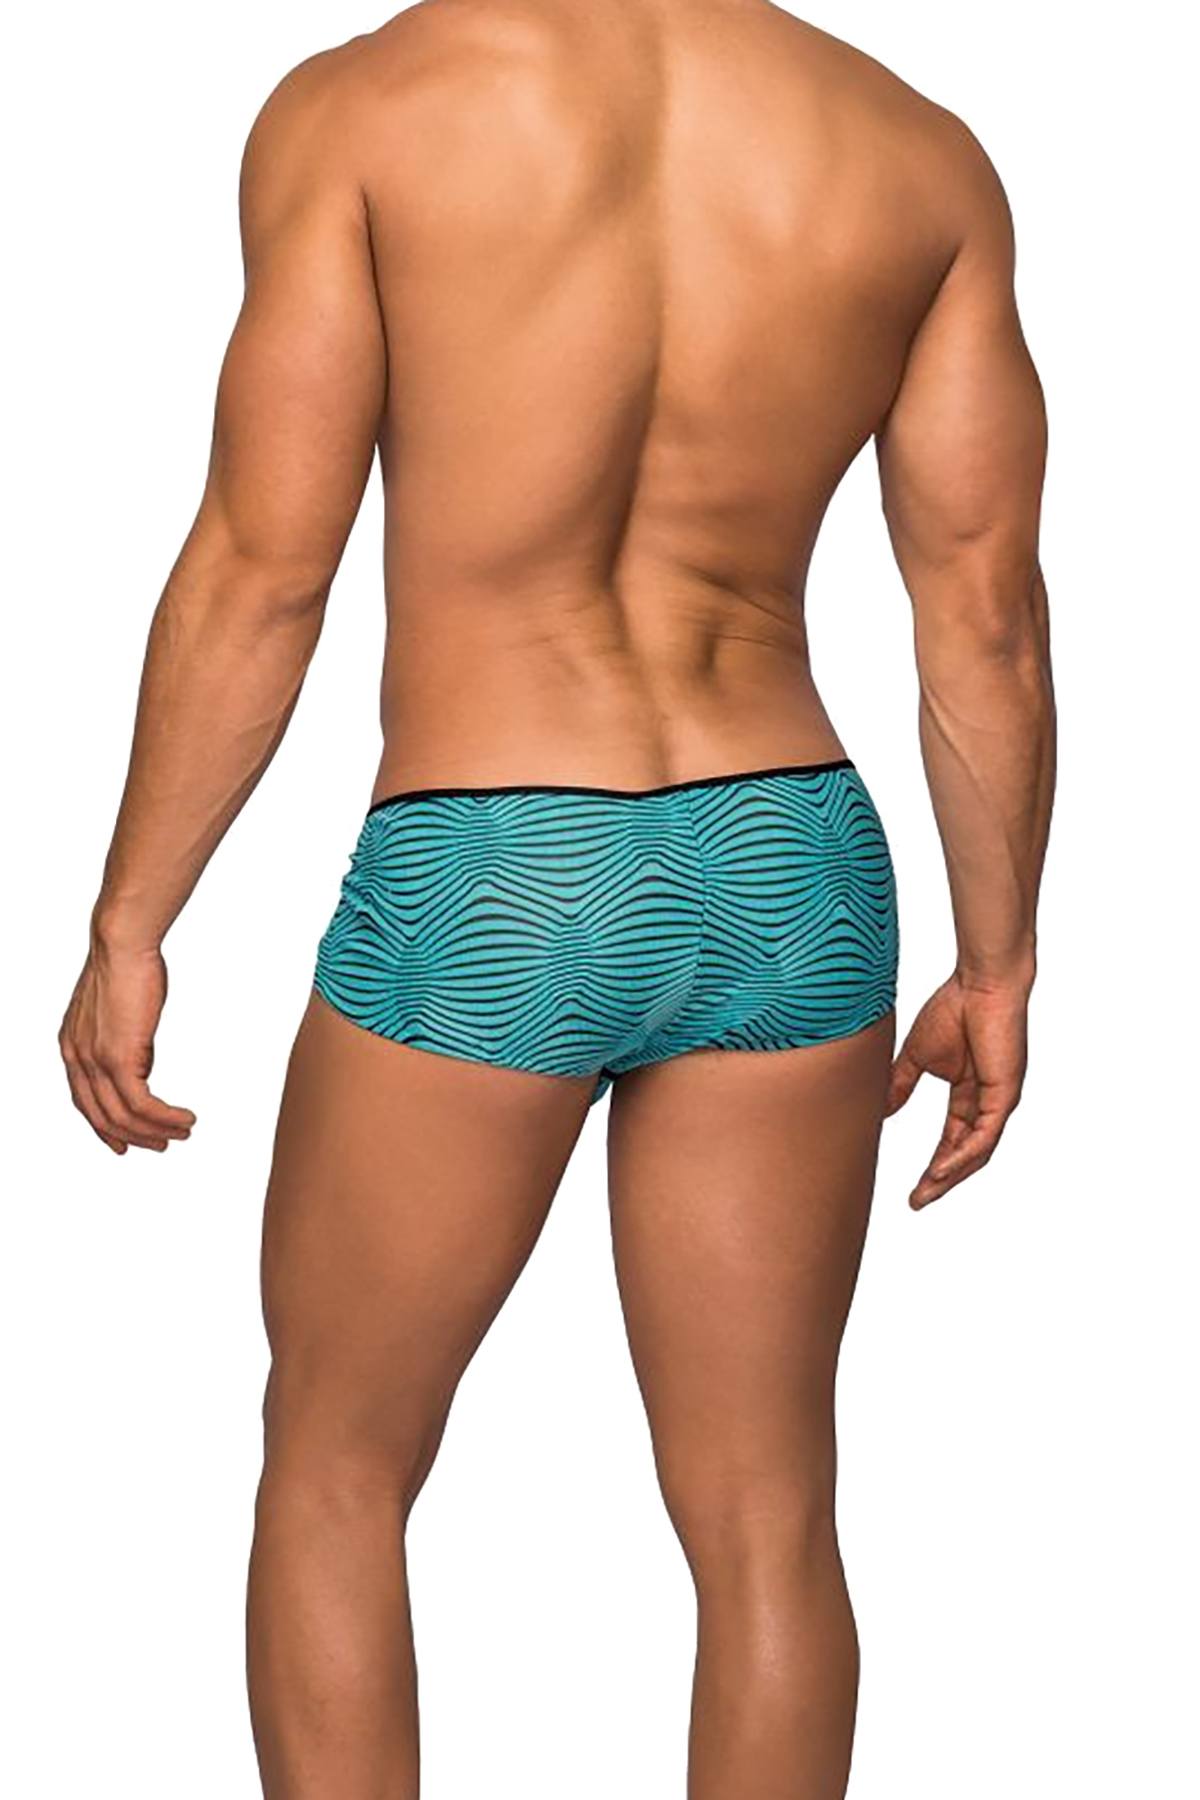 Male Power Green Tranquil Abyss Micro Mini-Short Brief